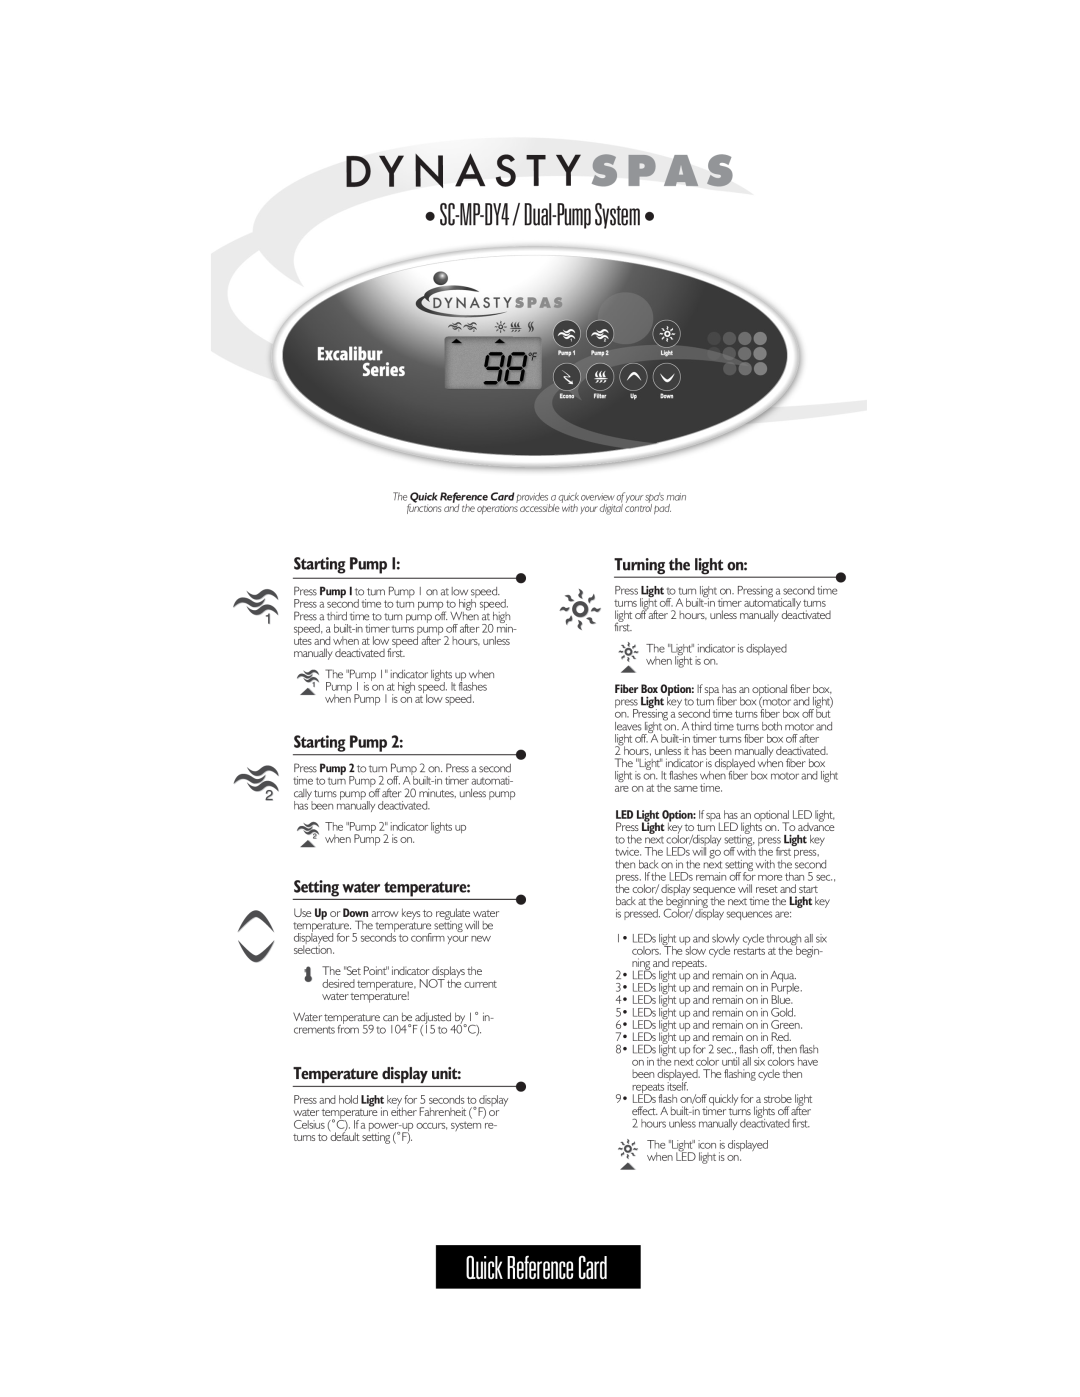 Dynasty Spas manual SC-MP-DY4 / Dual-Pump System, The Quick Reference Card provides a quick overview of your spas main 